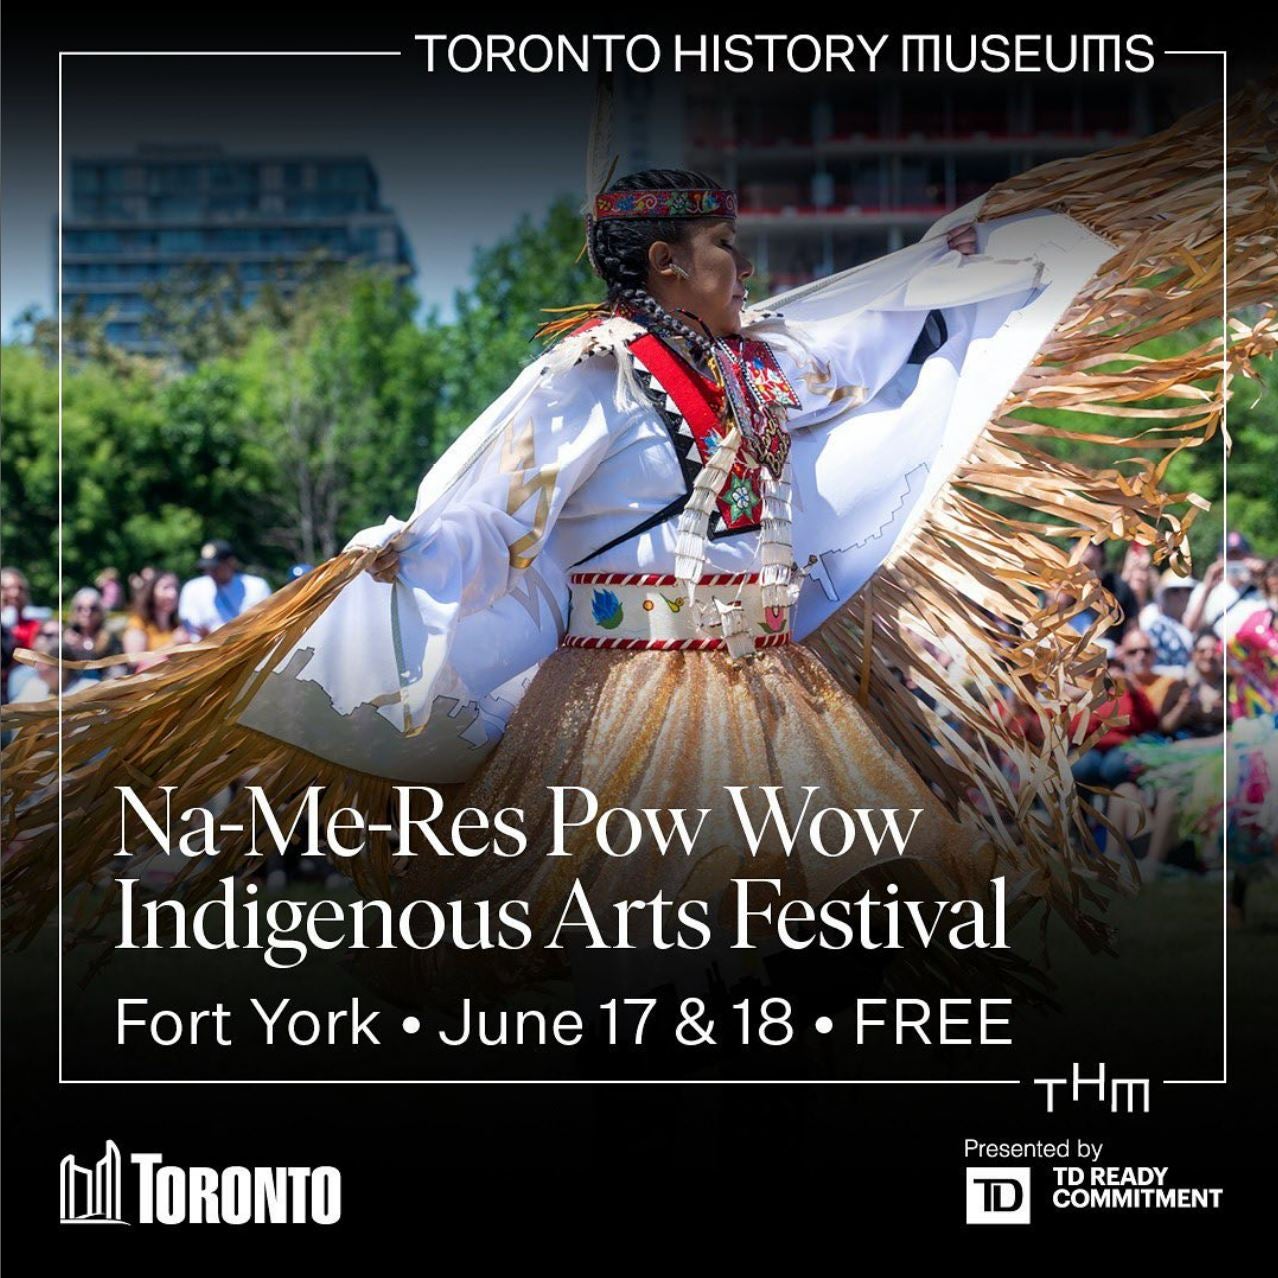 Na-Mes-Res Pow Wow and Indigenous Arts Festival at Fort York